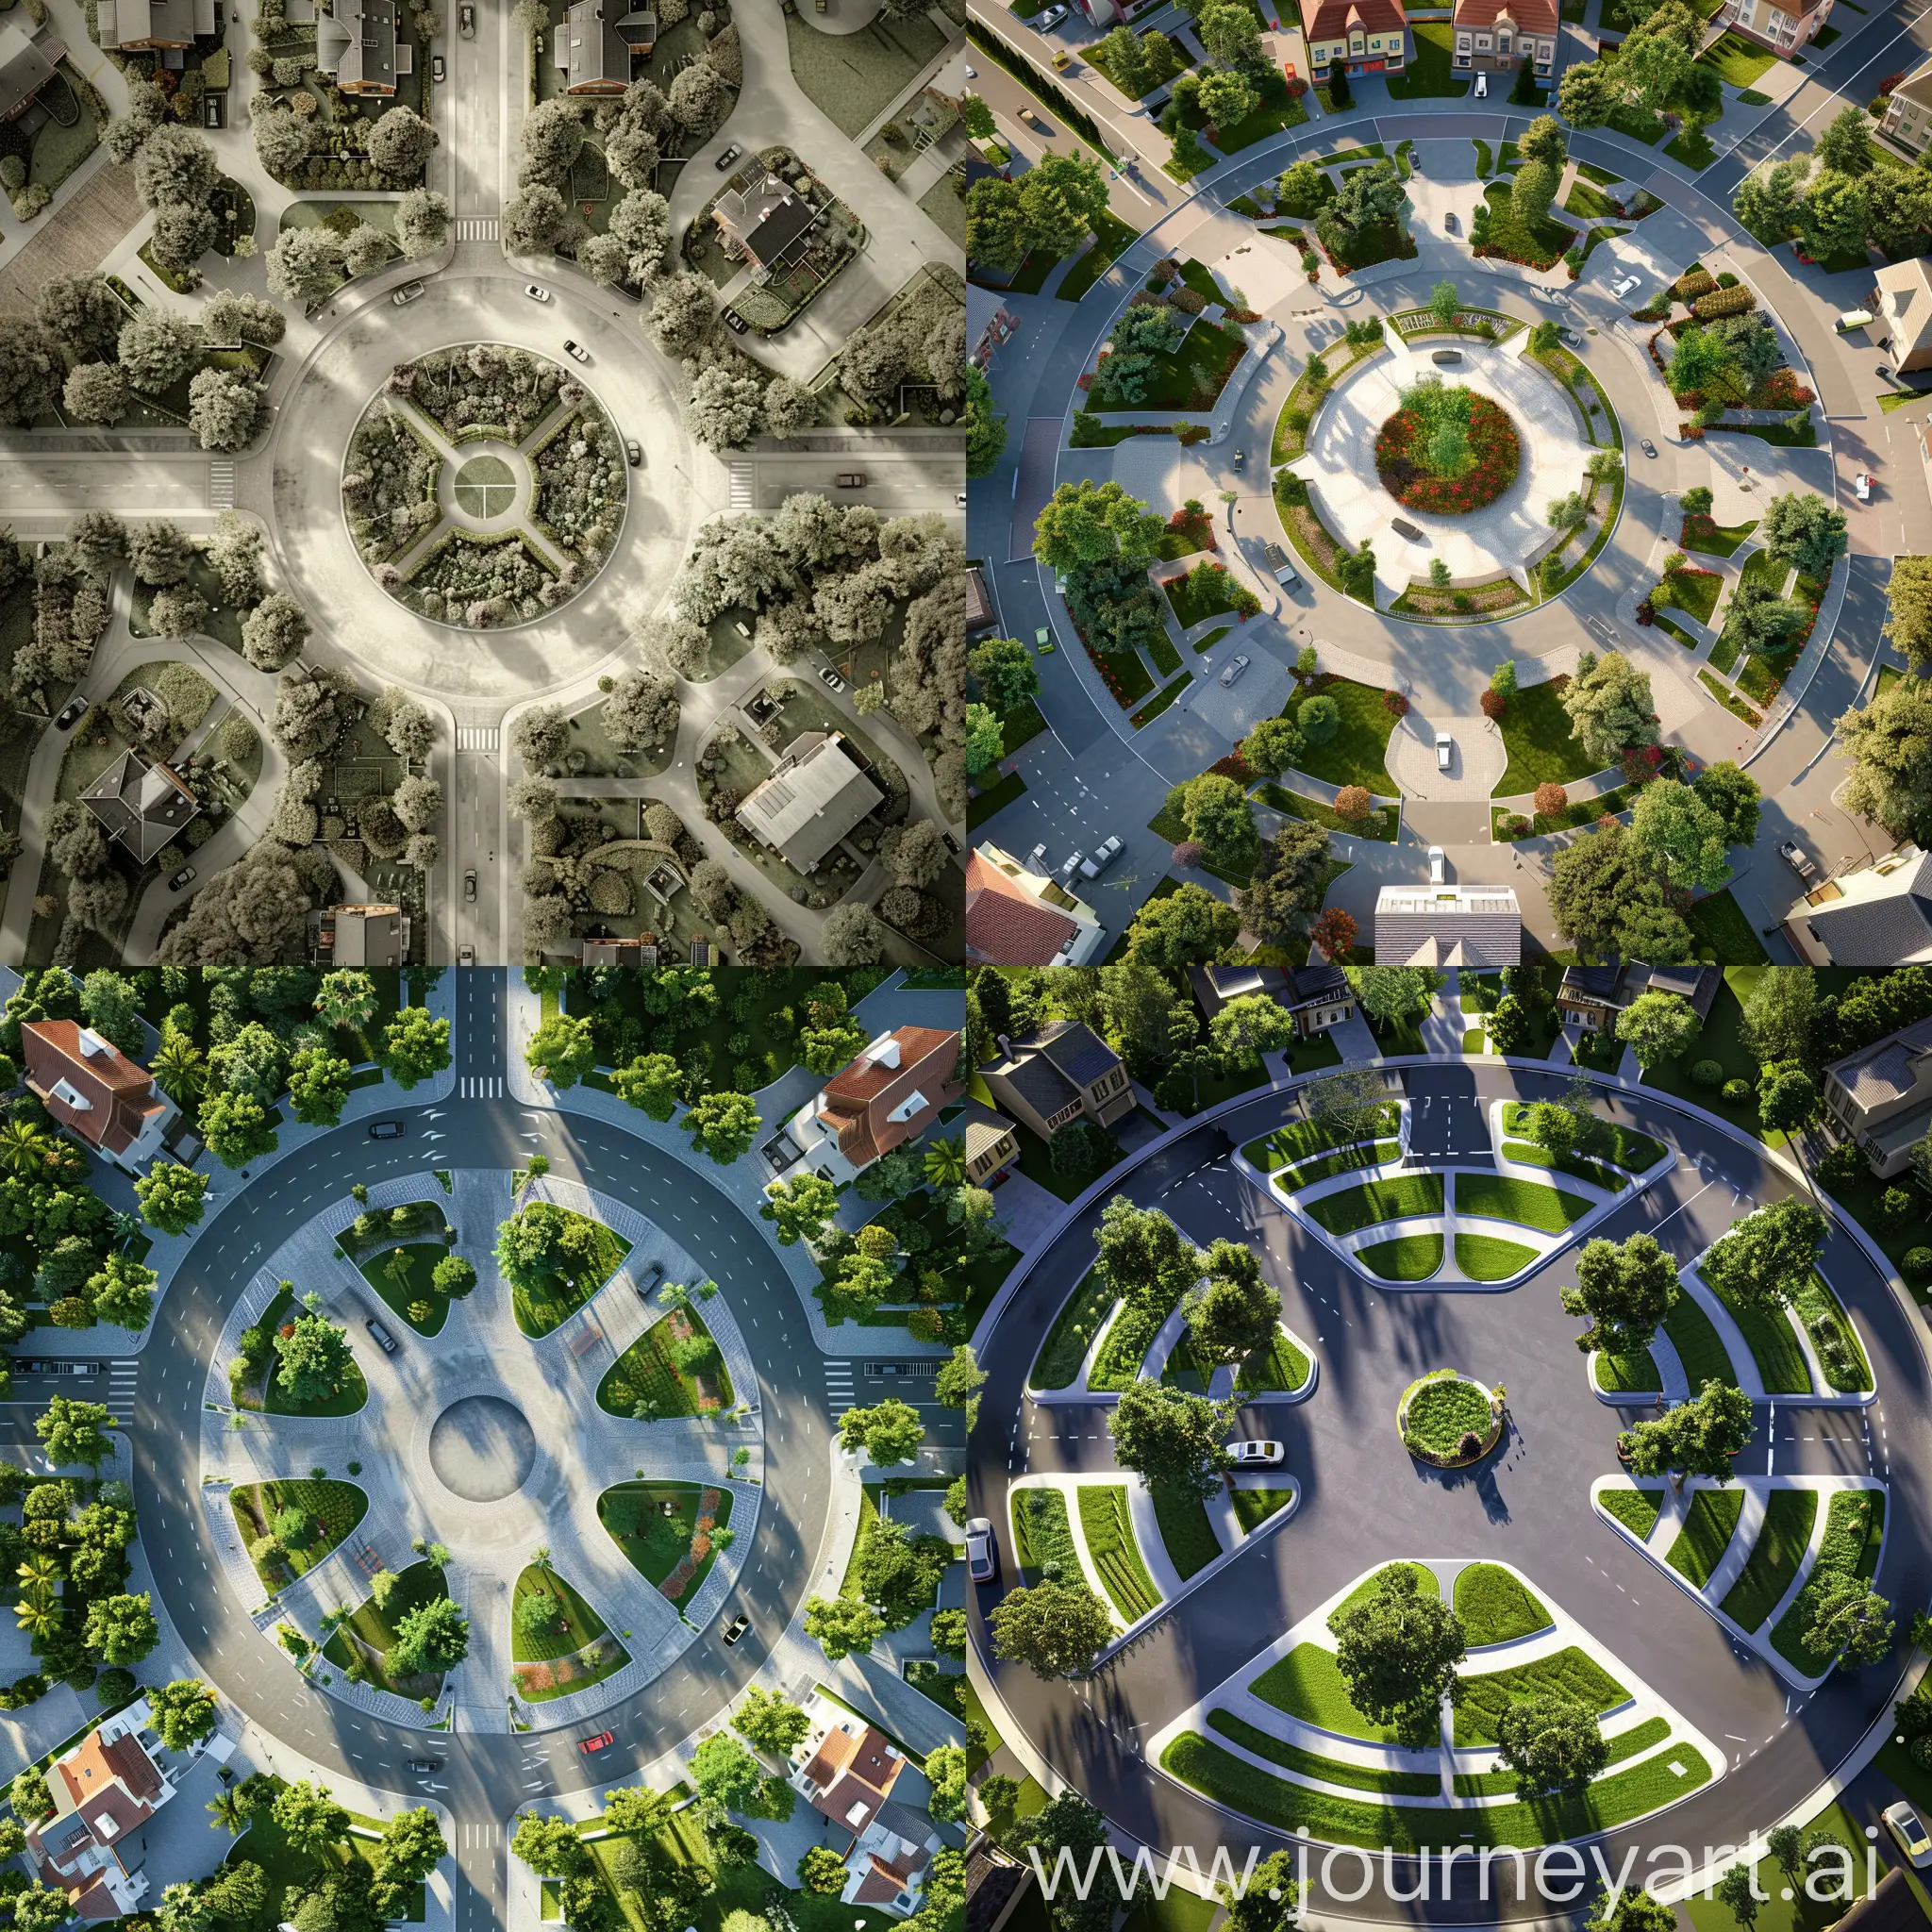 Urban-Roundabout-with-Vibrant-Pavement-Changes-and-Surrounding-Parks